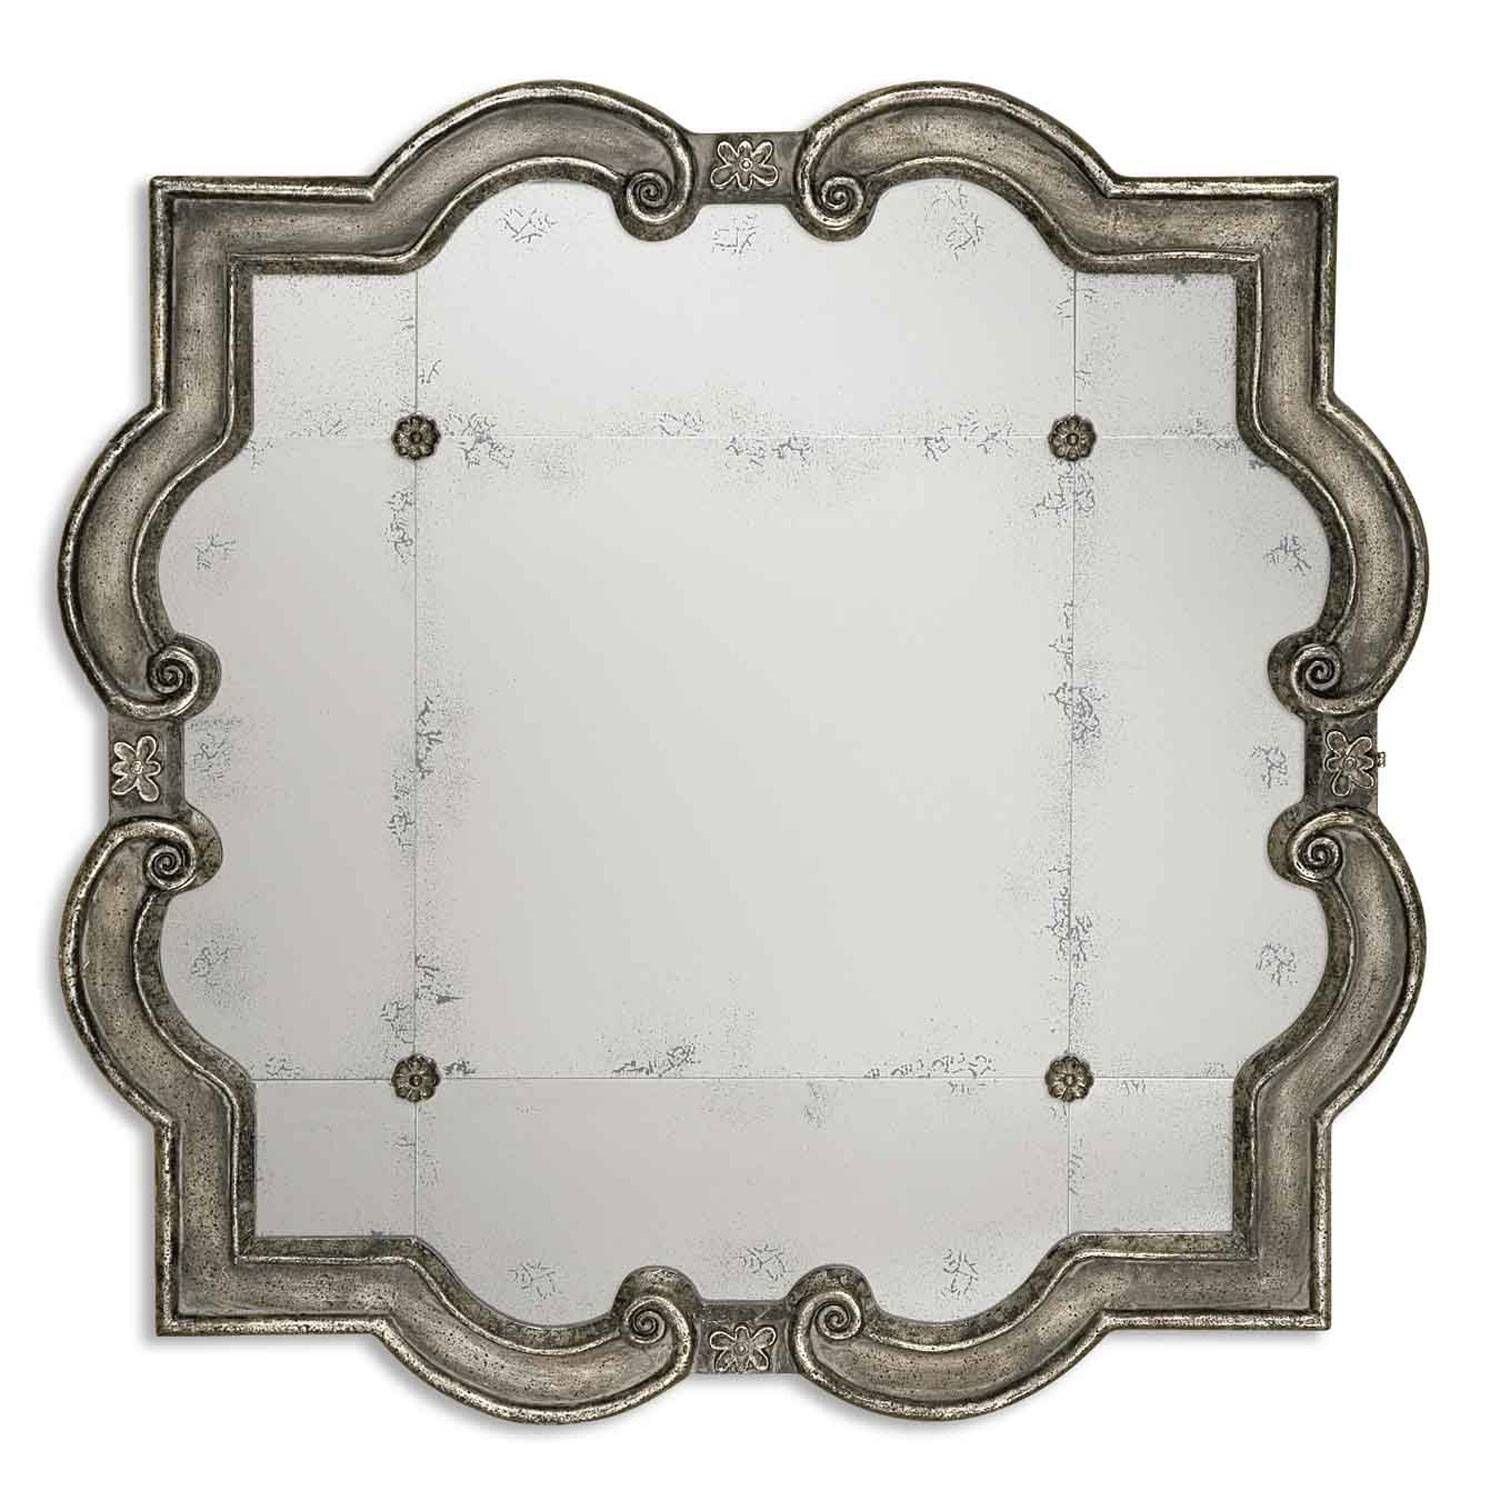 Old World Mirrors | Bellacor Inside Ornate Bathroom Mirrors (View 16 of 25)